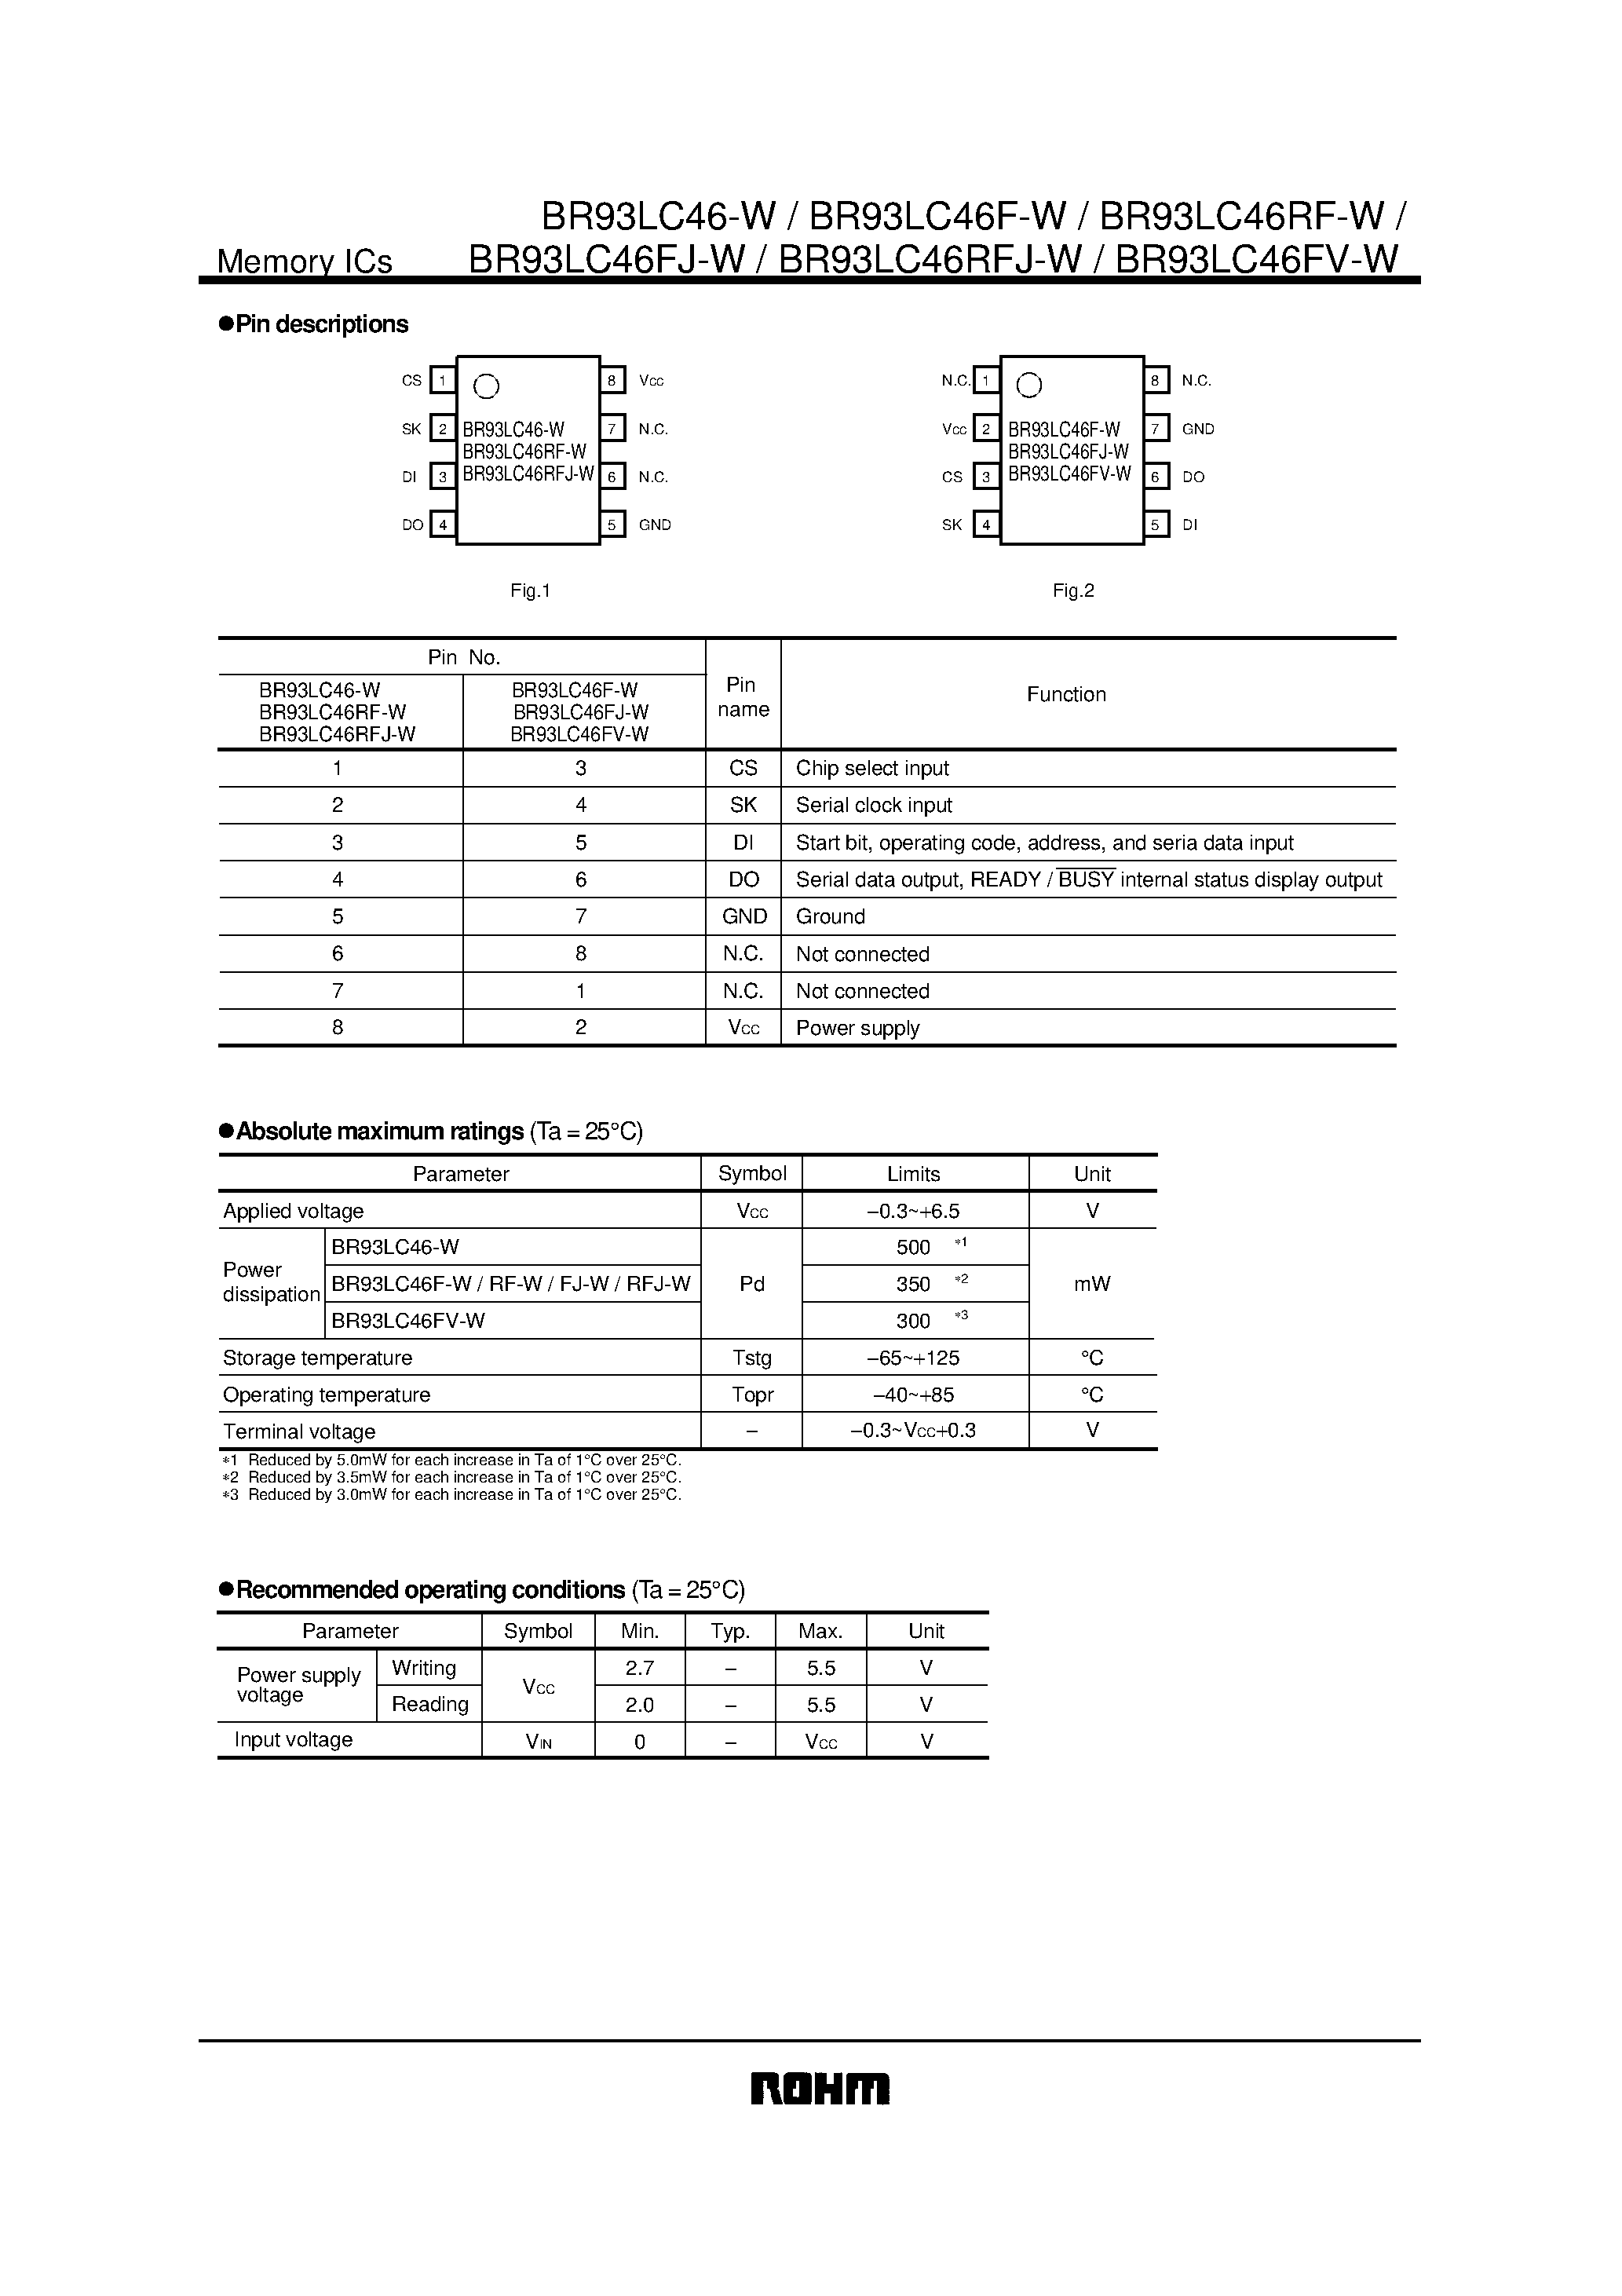 Datasheet BR93LC46RF-W - 6416bits serial EEPROM page 2